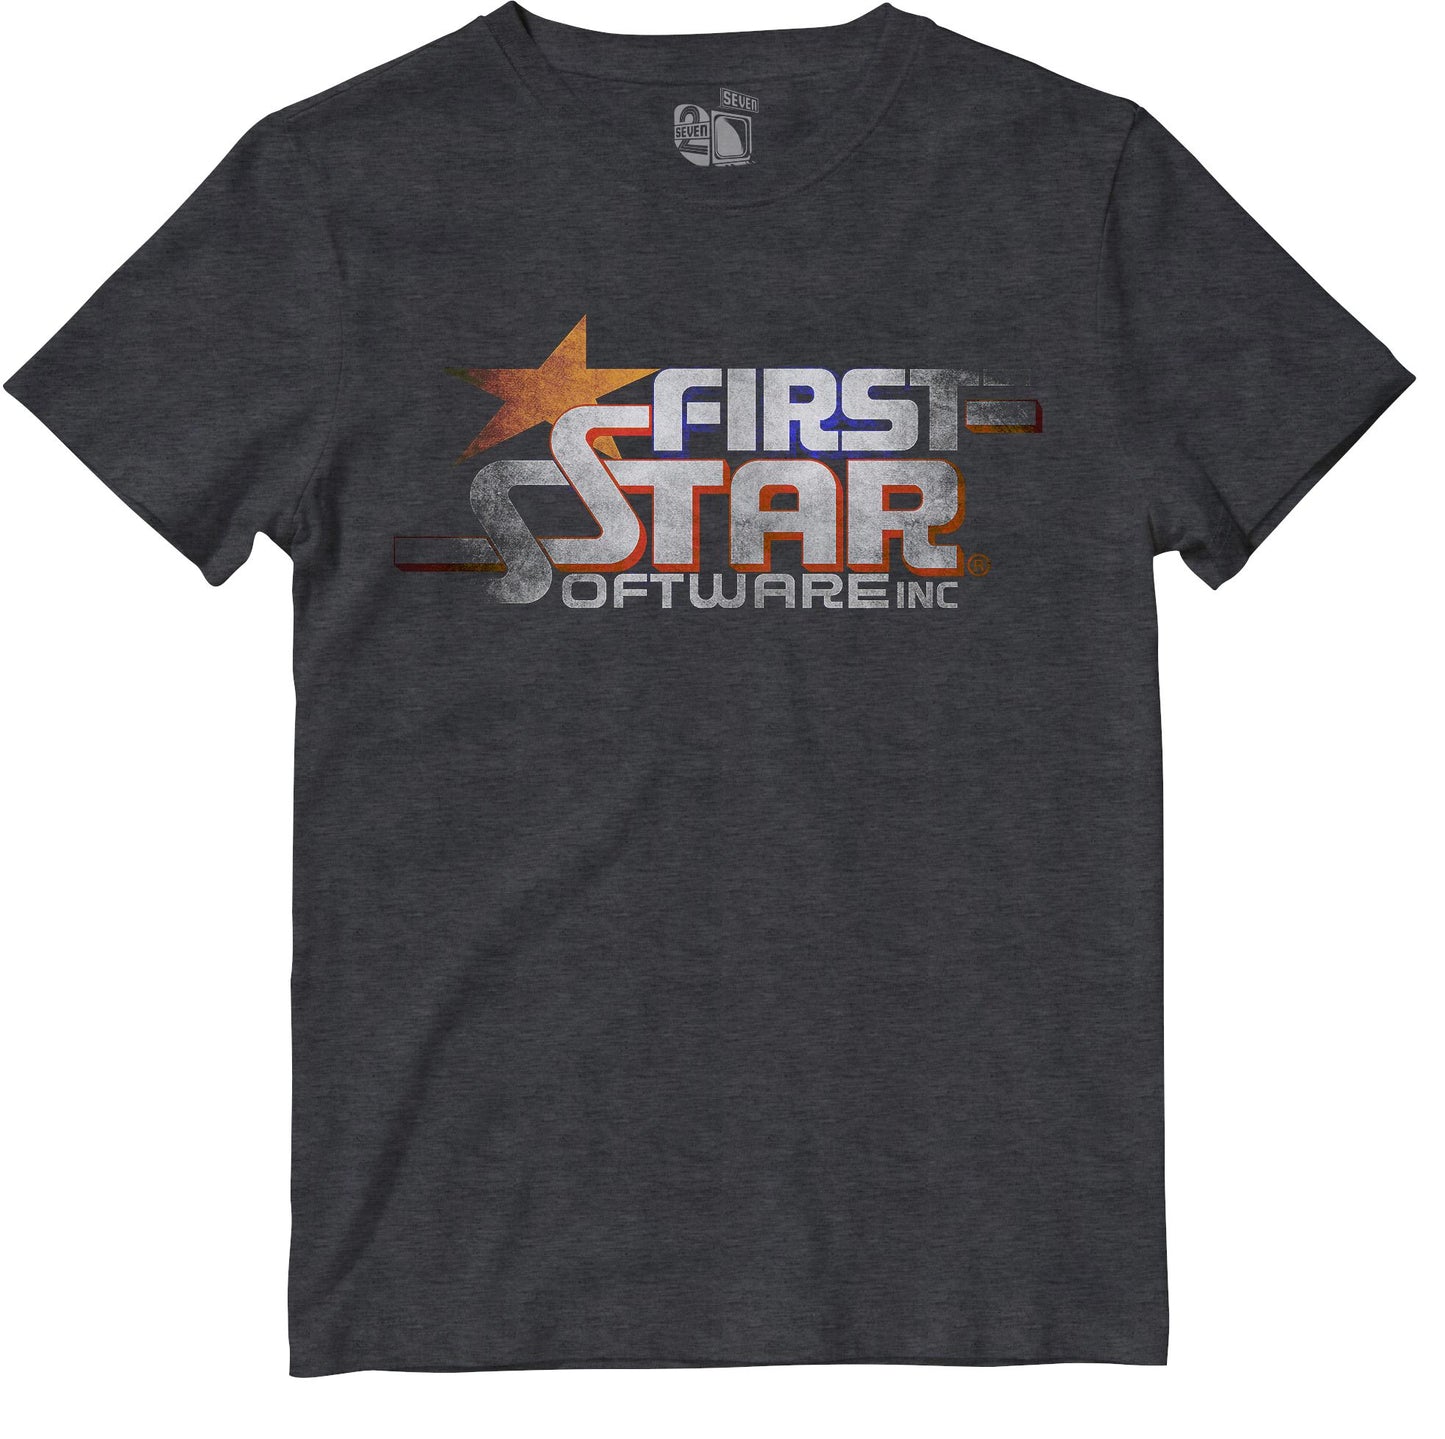 First Star Software Retro Gaming T-Shirt T-Shirt Seven Squared 